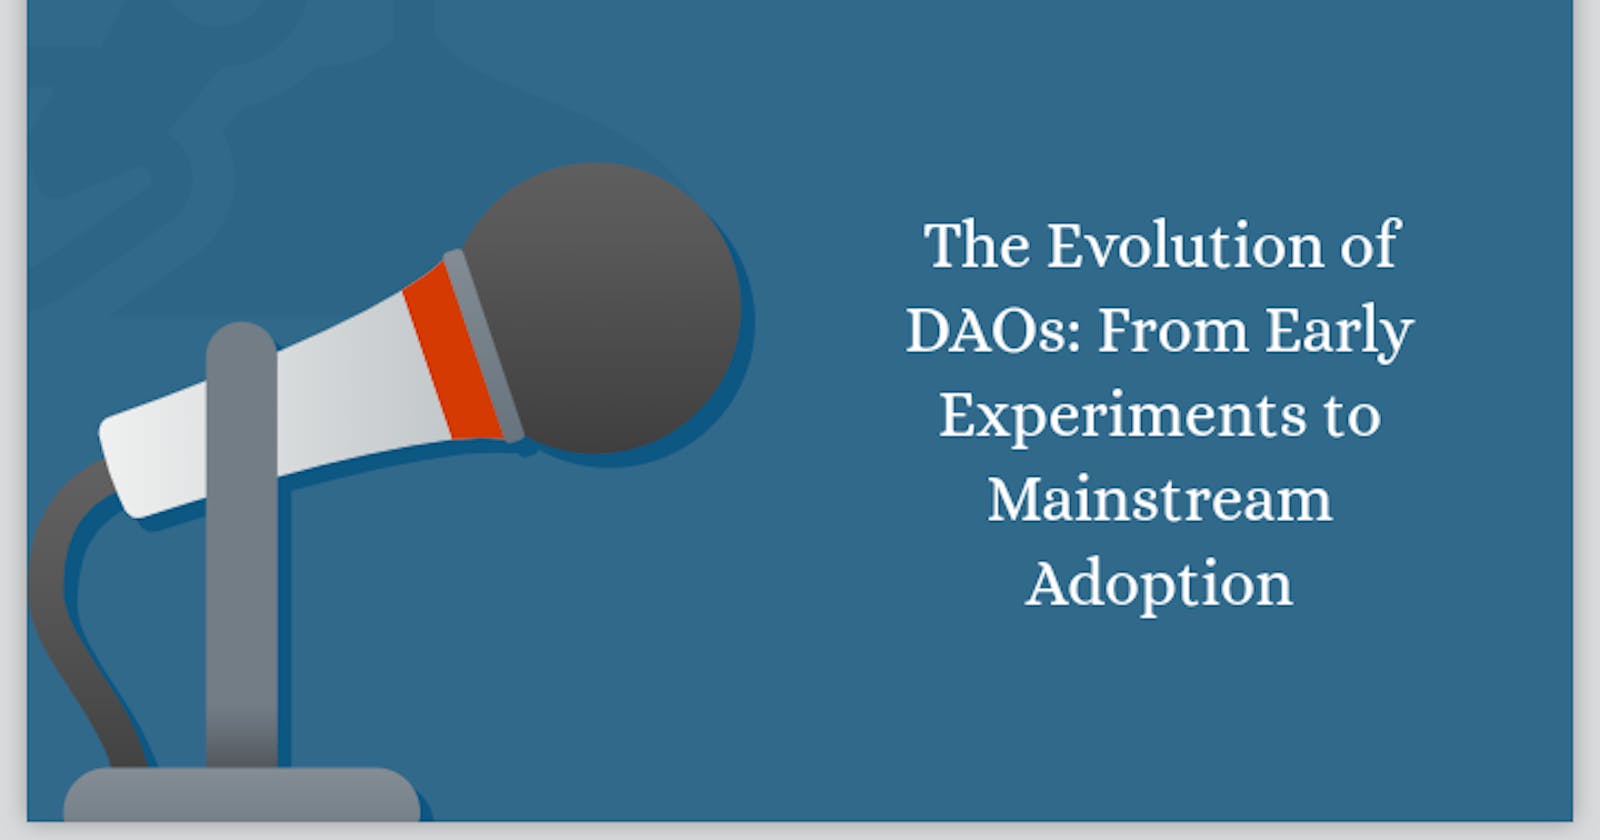 The Evolution of DAOs: From Early Experiments to Mainstream Adoption